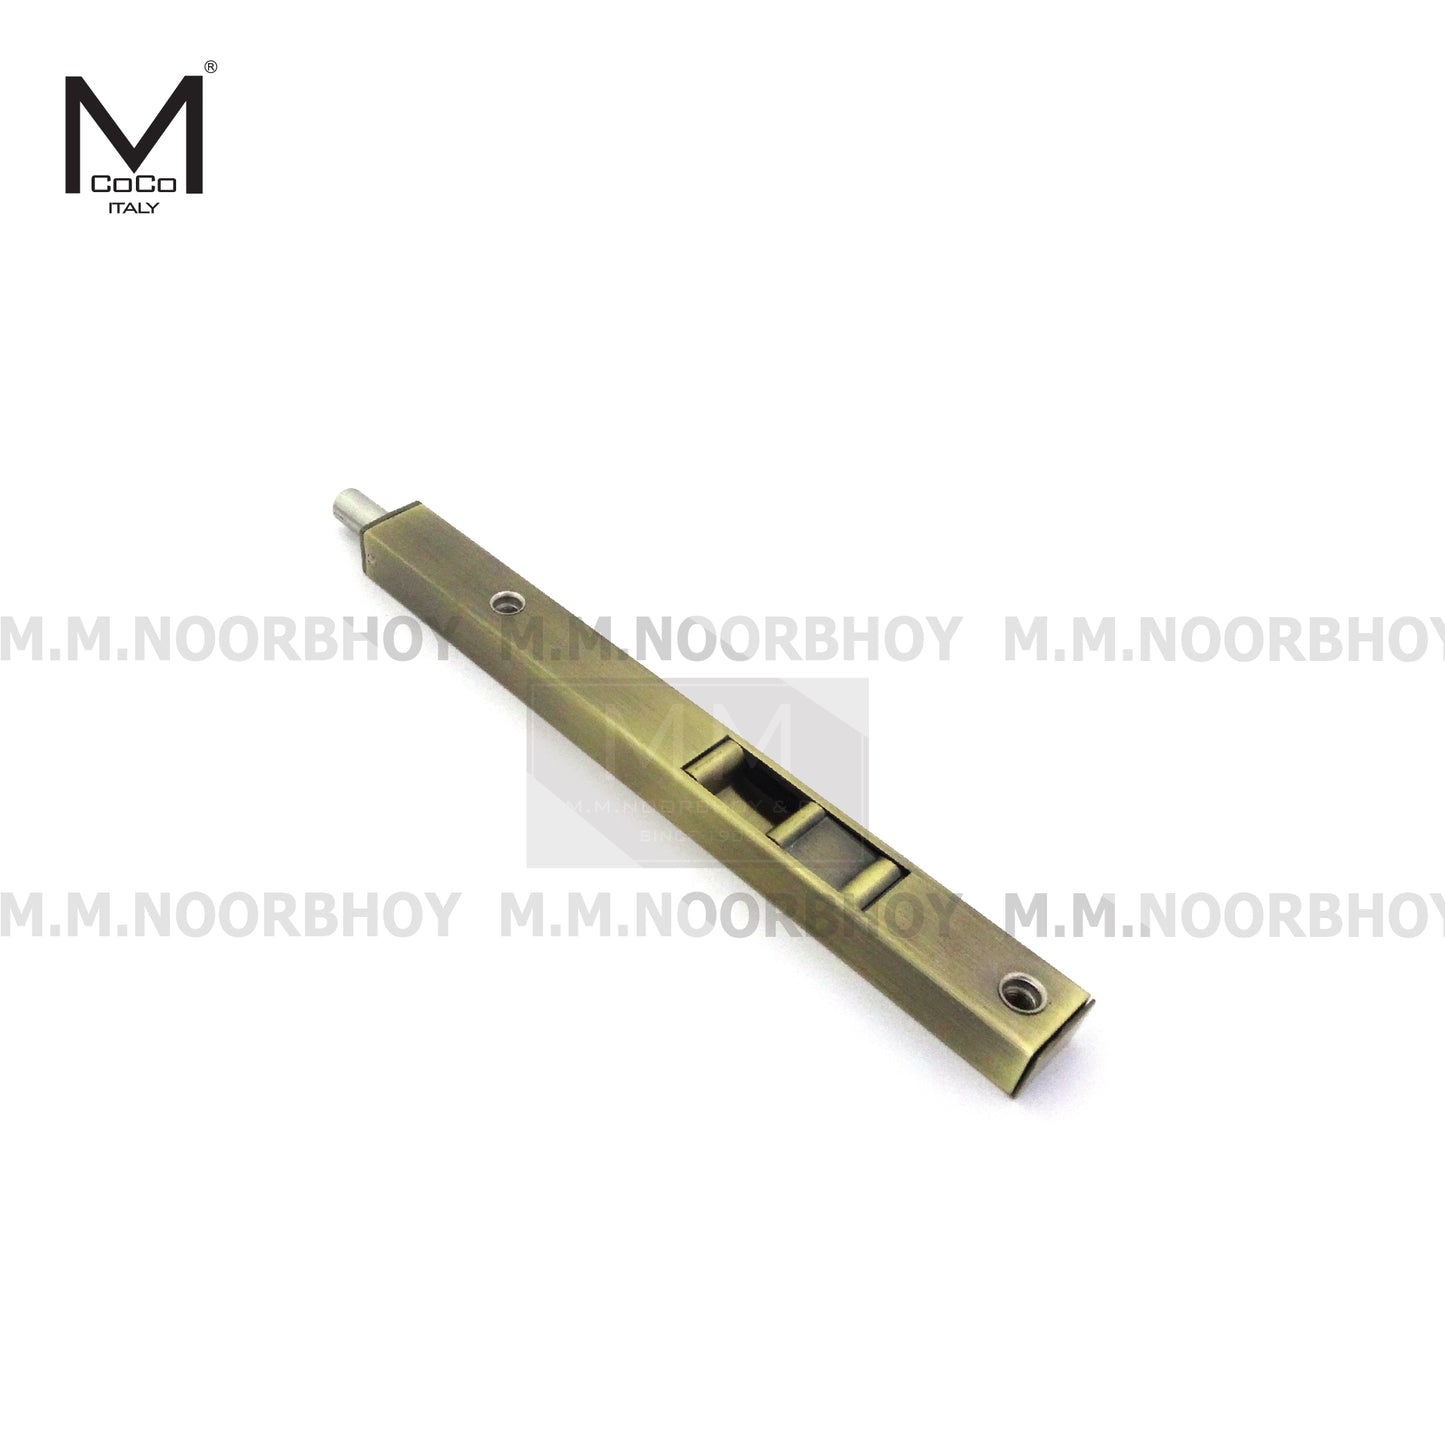 Mcoco Flush Door Bolt Sizes 8 to 24 Inches  Antique Brass & Stainless Steel Finish - DB021